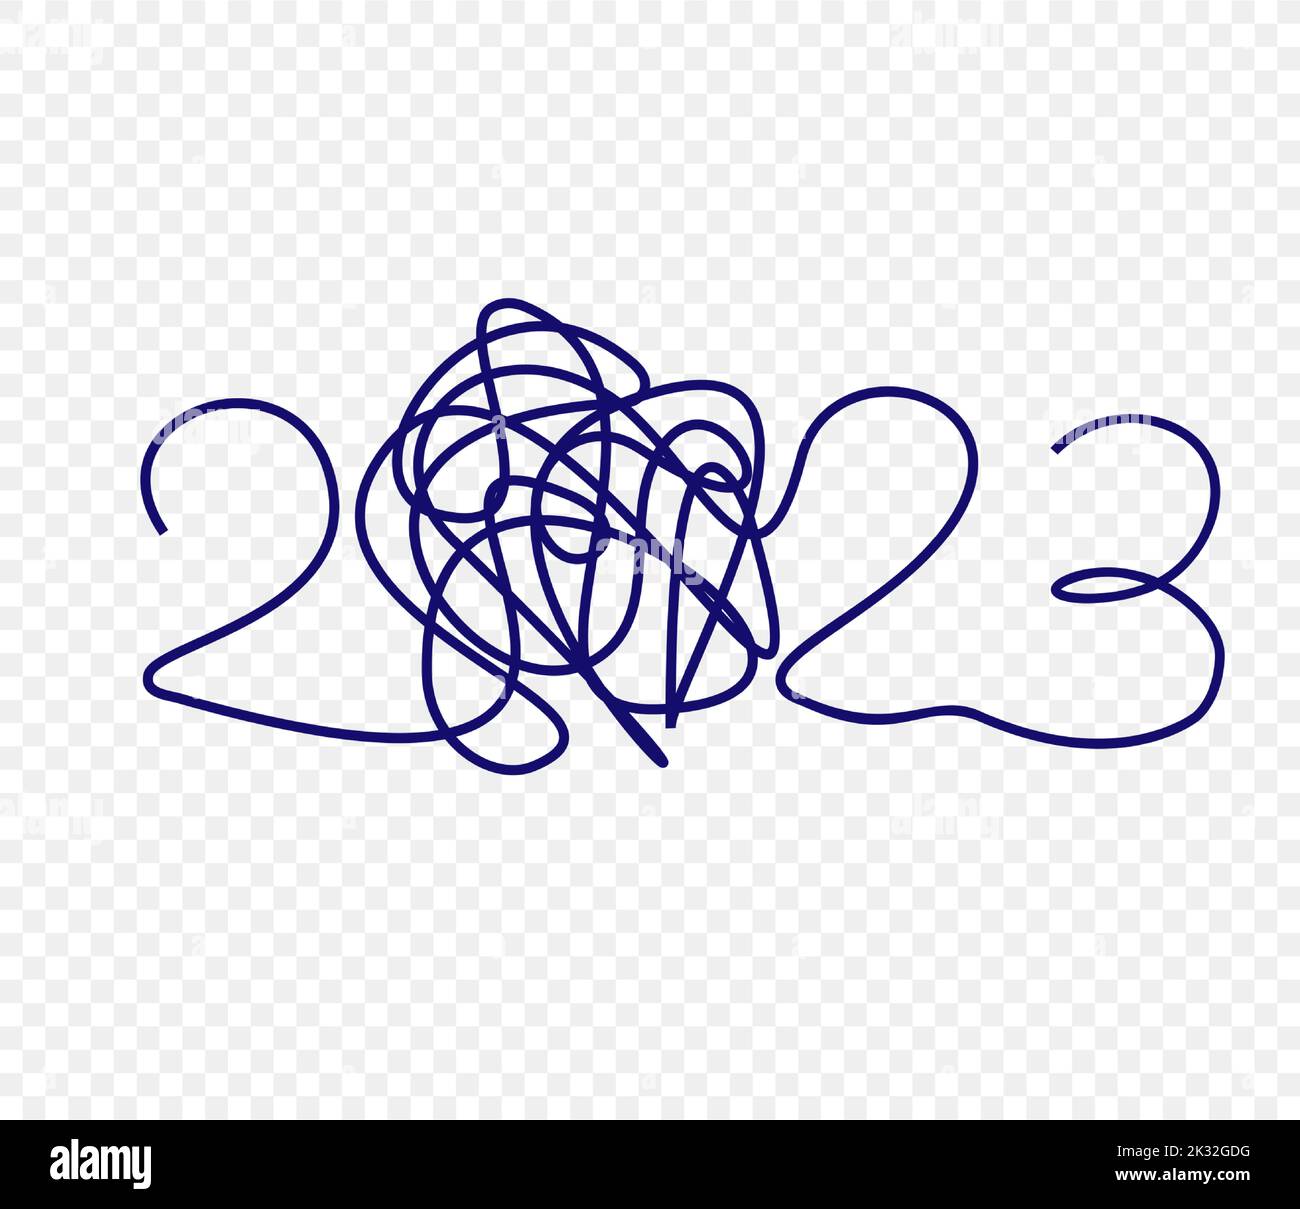 2023 numbers pen written with chaotic lines. Happy New Year event poster, greeting card cover, 2023 calendar design, invitation to celebrate New Year Stock Vector